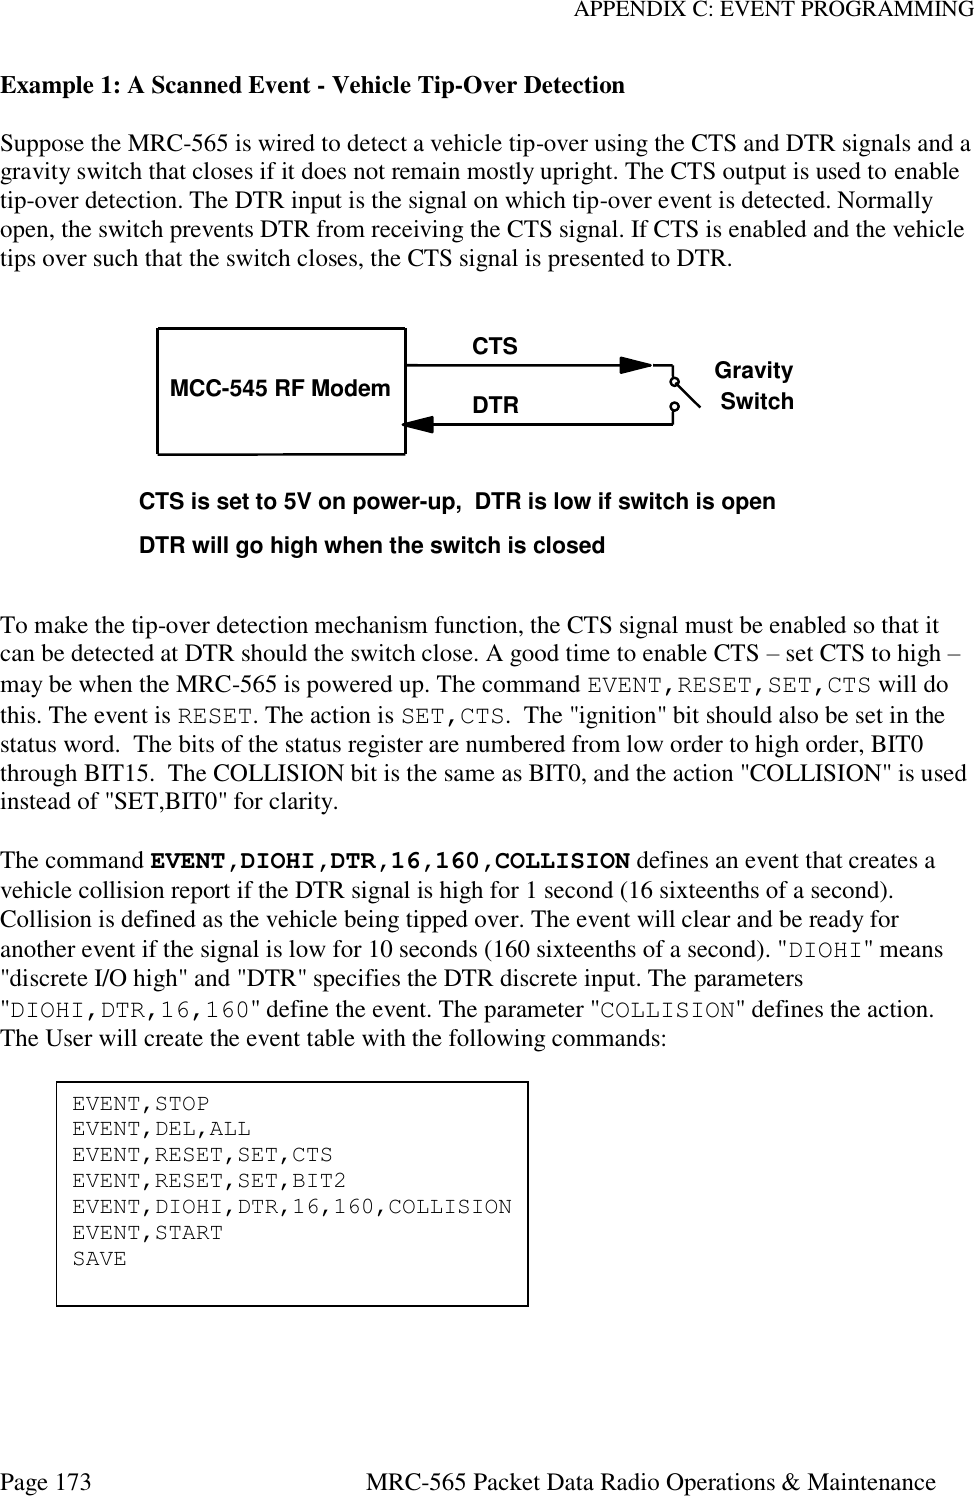 APPENDIX C: EVENT PROGRAMMING Page 173  MRC-565 Packet Data Radio Operations &amp; Maintenance Example 1: A Scanned Event - Vehicle Tip-Over Detection  Suppose the MRC-565 is wired to detect a vehicle tip-over using the CTS and DTR signals and a gravity switch that closes if it does not remain mostly upright. The CTS output is used to enable tip-over detection. The DTR input is the signal on which tip-over event is detected. Normally open, the switch prevents DTR from receiving the CTS signal. If CTS is enabled and the vehicle tips over such that the switch closes, the CTS signal is presented to DTR.  To make the tip-over detection mechanism function, the CTS signal must be enabled so that it can be detected at DTR should the switch close. A good time to enable CTS – set CTS to high – may be when the MRC-565 is powered up. The command EVENT,RESET,SET,CTS will do this. The event is RESET. The action is SET,CTS.  The &quot;ignition&quot; bit should also be set in the status word.  The bits of the status register are numbered from low order to high order, BIT0 through BIT15.  The COLLISION bit is the same as BIT0, and the action &quot;COLLISION&quot; is used instead of &quot;SET,BIT0&quot; for clarity.  The command EVENT,DIOHI,DTR,16,160,COLLISION defines an event that creates a vehicle collision report if the DTR signal is high for 1 second (16 sixteenths of a second). Collision is defined as the vehicle being tipped over. The event will clear and be ready for another event if the signal is low for 10 seconds (160 sixteenths of a second). &quot;DIOHI&quot; means &quot;discrete I/O high&quot; and &quot;DTR&quot; specifies the DTR discrete input. The parameters &quot;DIOHI,DTR,16,160&quot; define the event. The parameter &quot;COLLISION&quot; defines the action. The User will create the event table with the following commands:               MCC-545 RF ModemCTSDTRGravitySwitchCTS is set to 5V on power-up,  DTR is low if switch is openDTR will go high when the switch is closedEVENT,STOP EVENT,DEL,ALL EVENT,RESET,SET,CTS EVENT,RESET,SET,BIT2 EVENT,DIOHI,DTR,16,160,COLLISION EVENT,START SAVE 